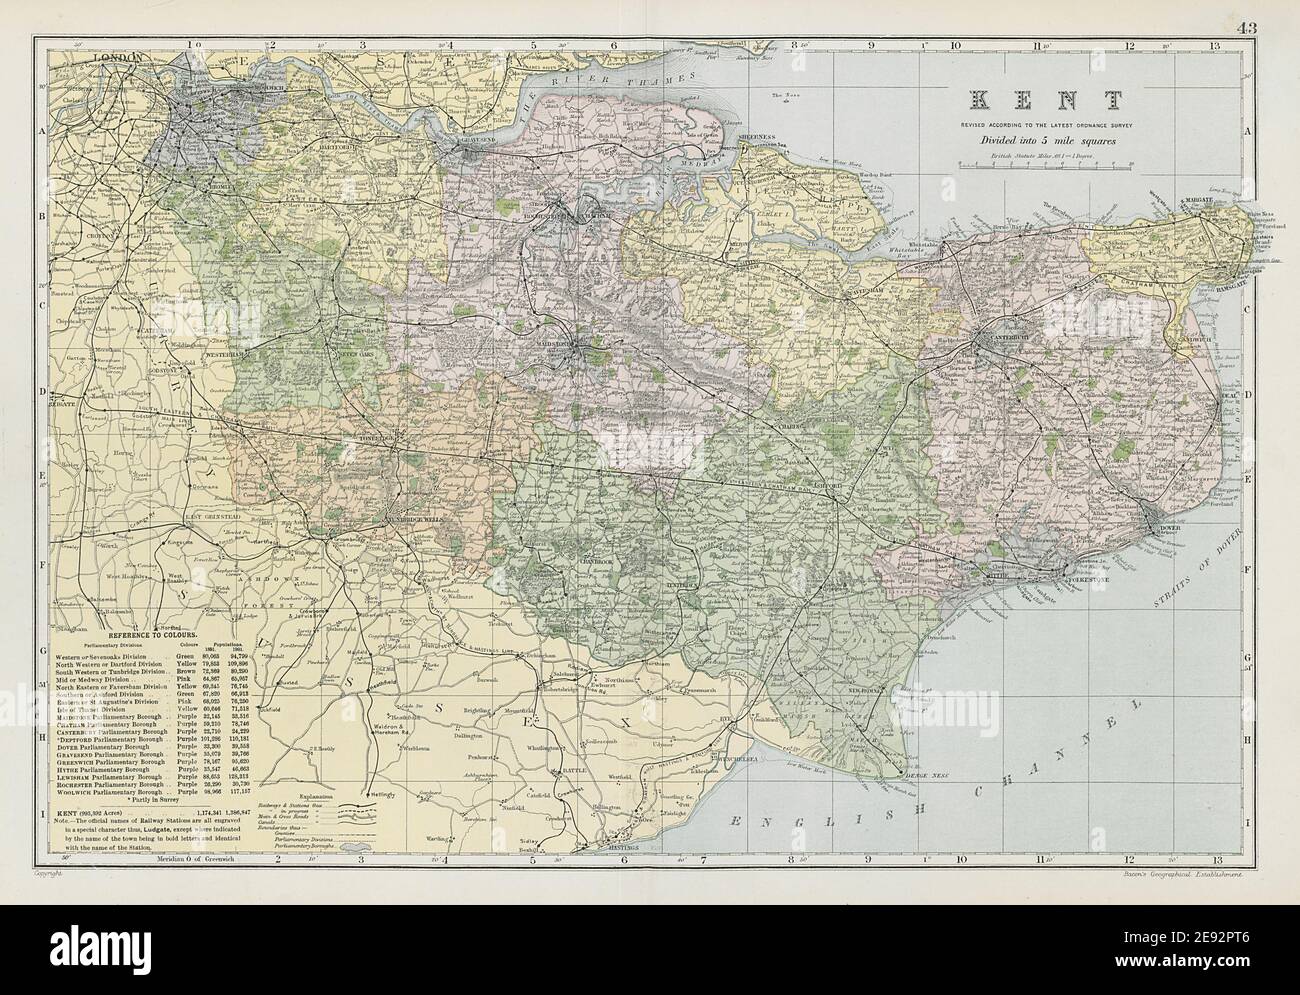 KENT county map. Parliamentary constituencies divisions. Railways. BACON 1906 Stock Photo